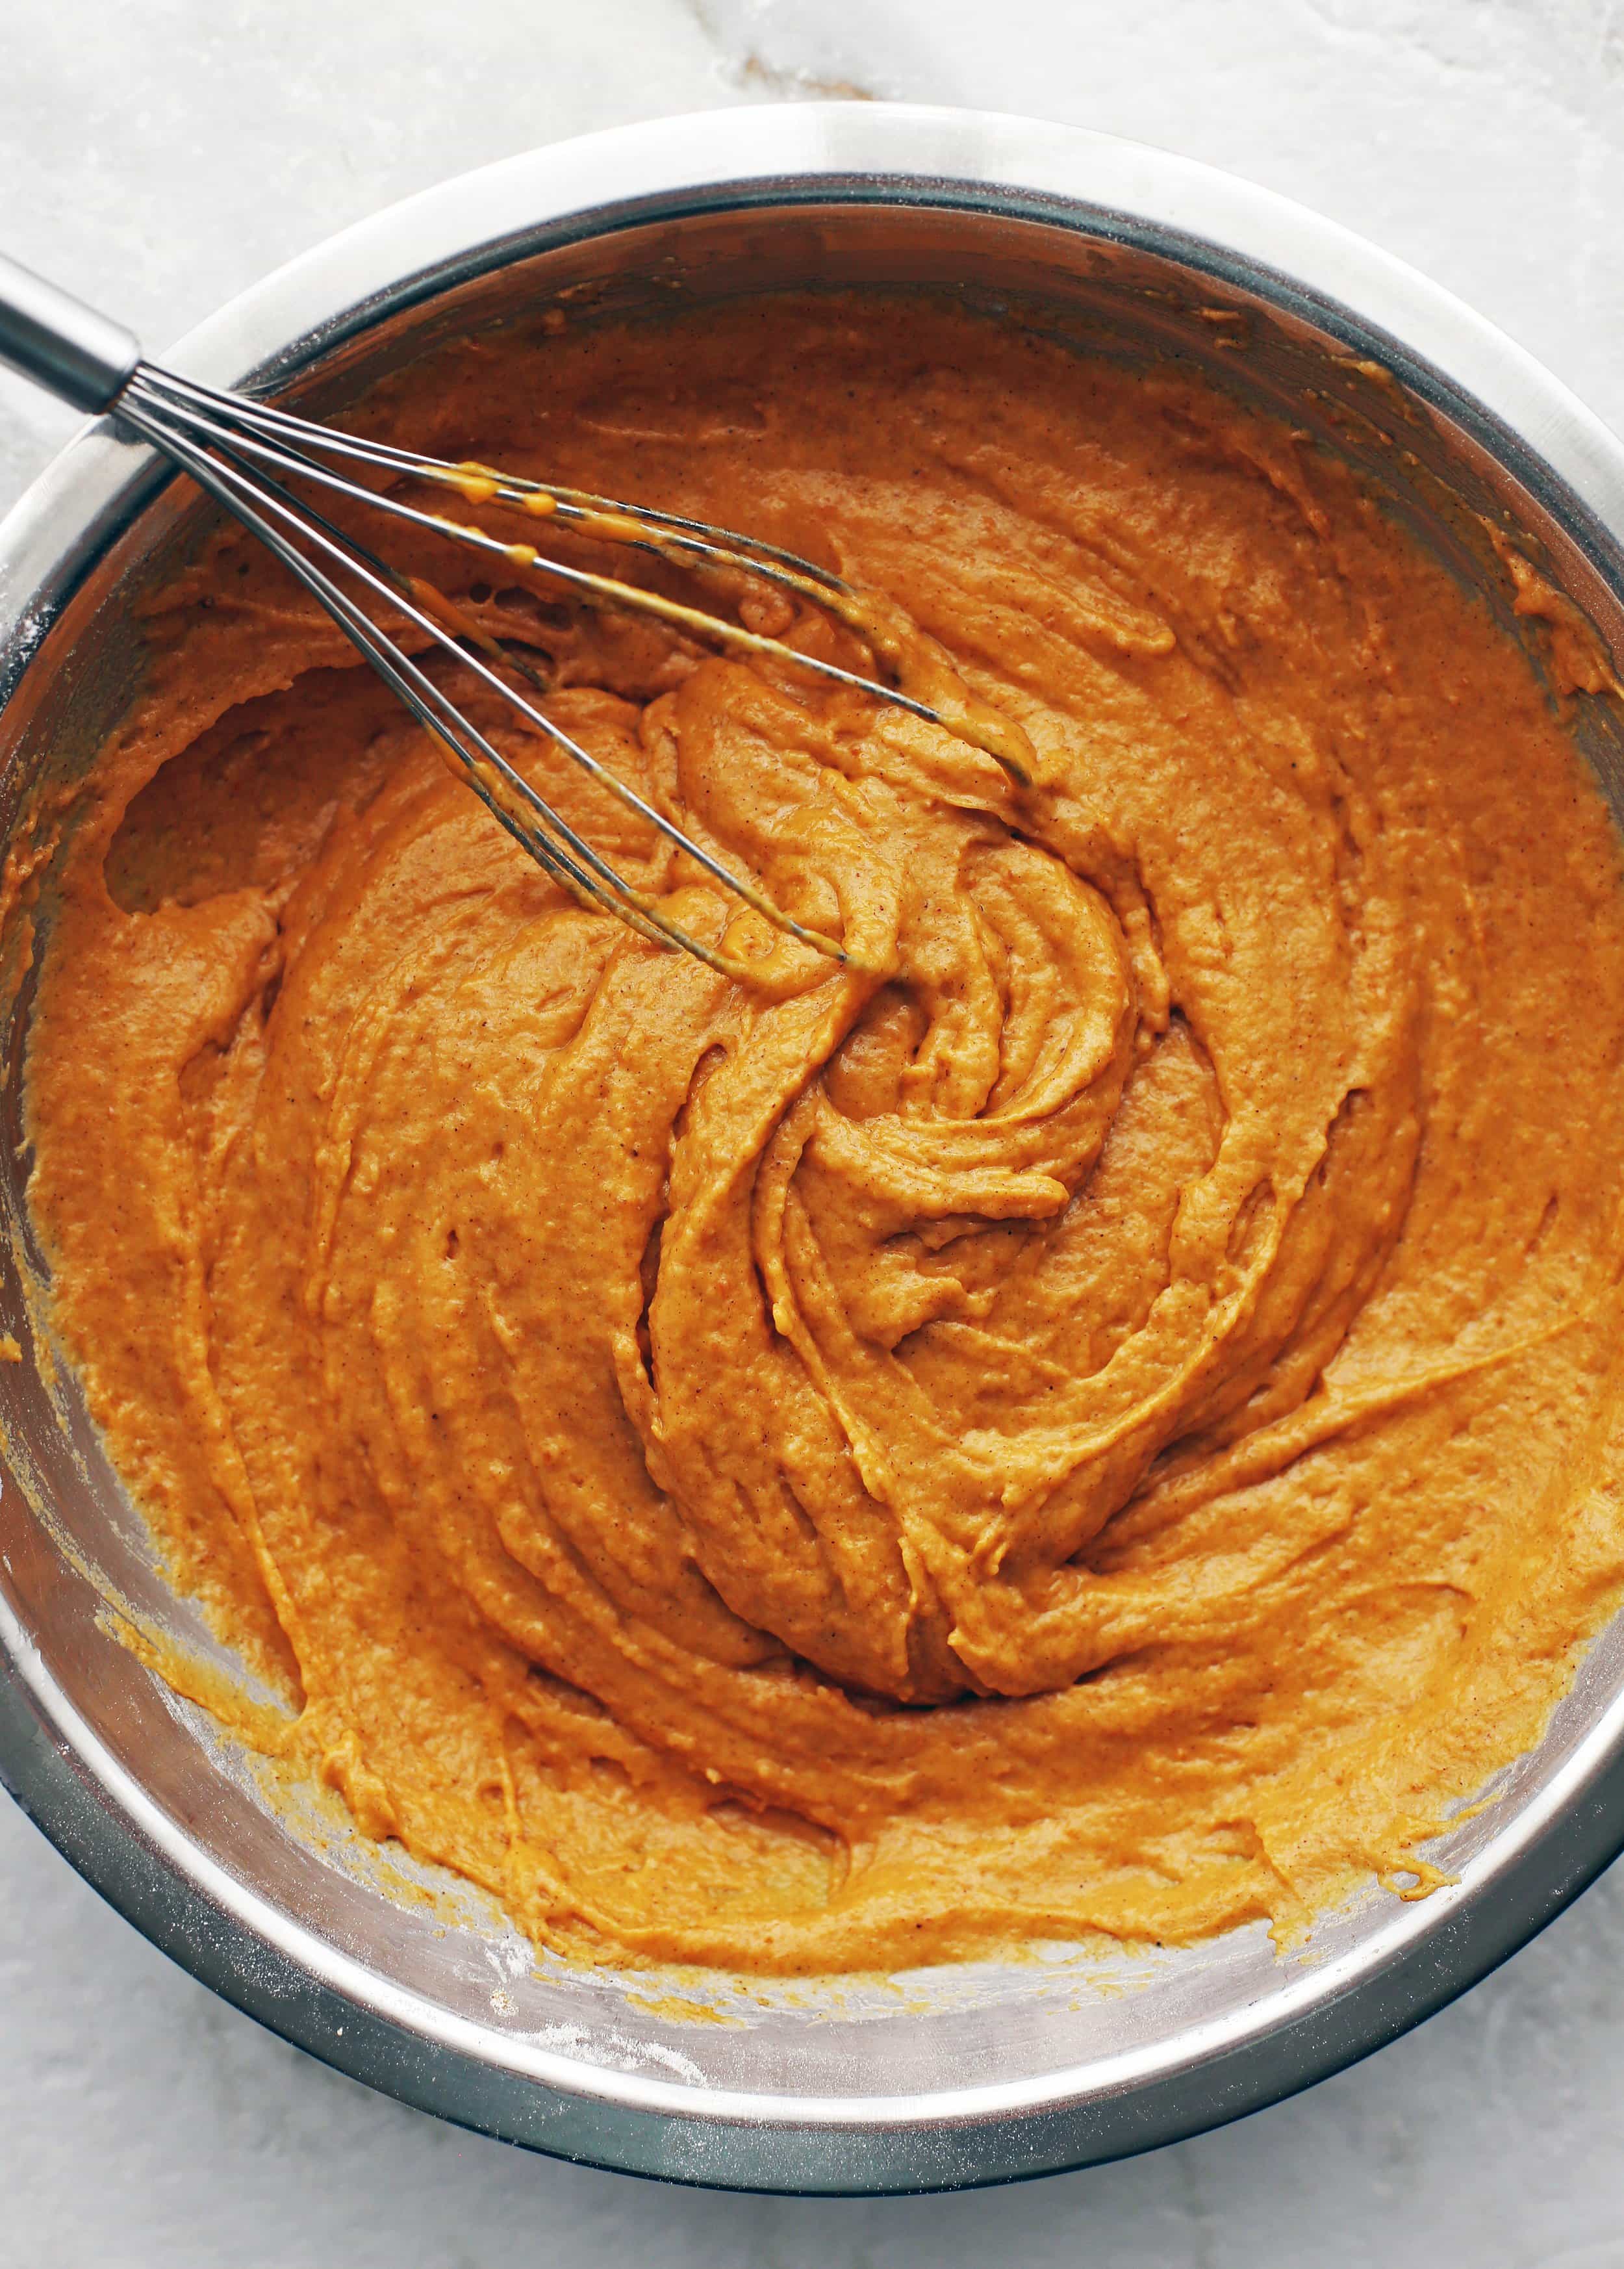 Pumpkin muffin batter mixed together in a large metal bowl.